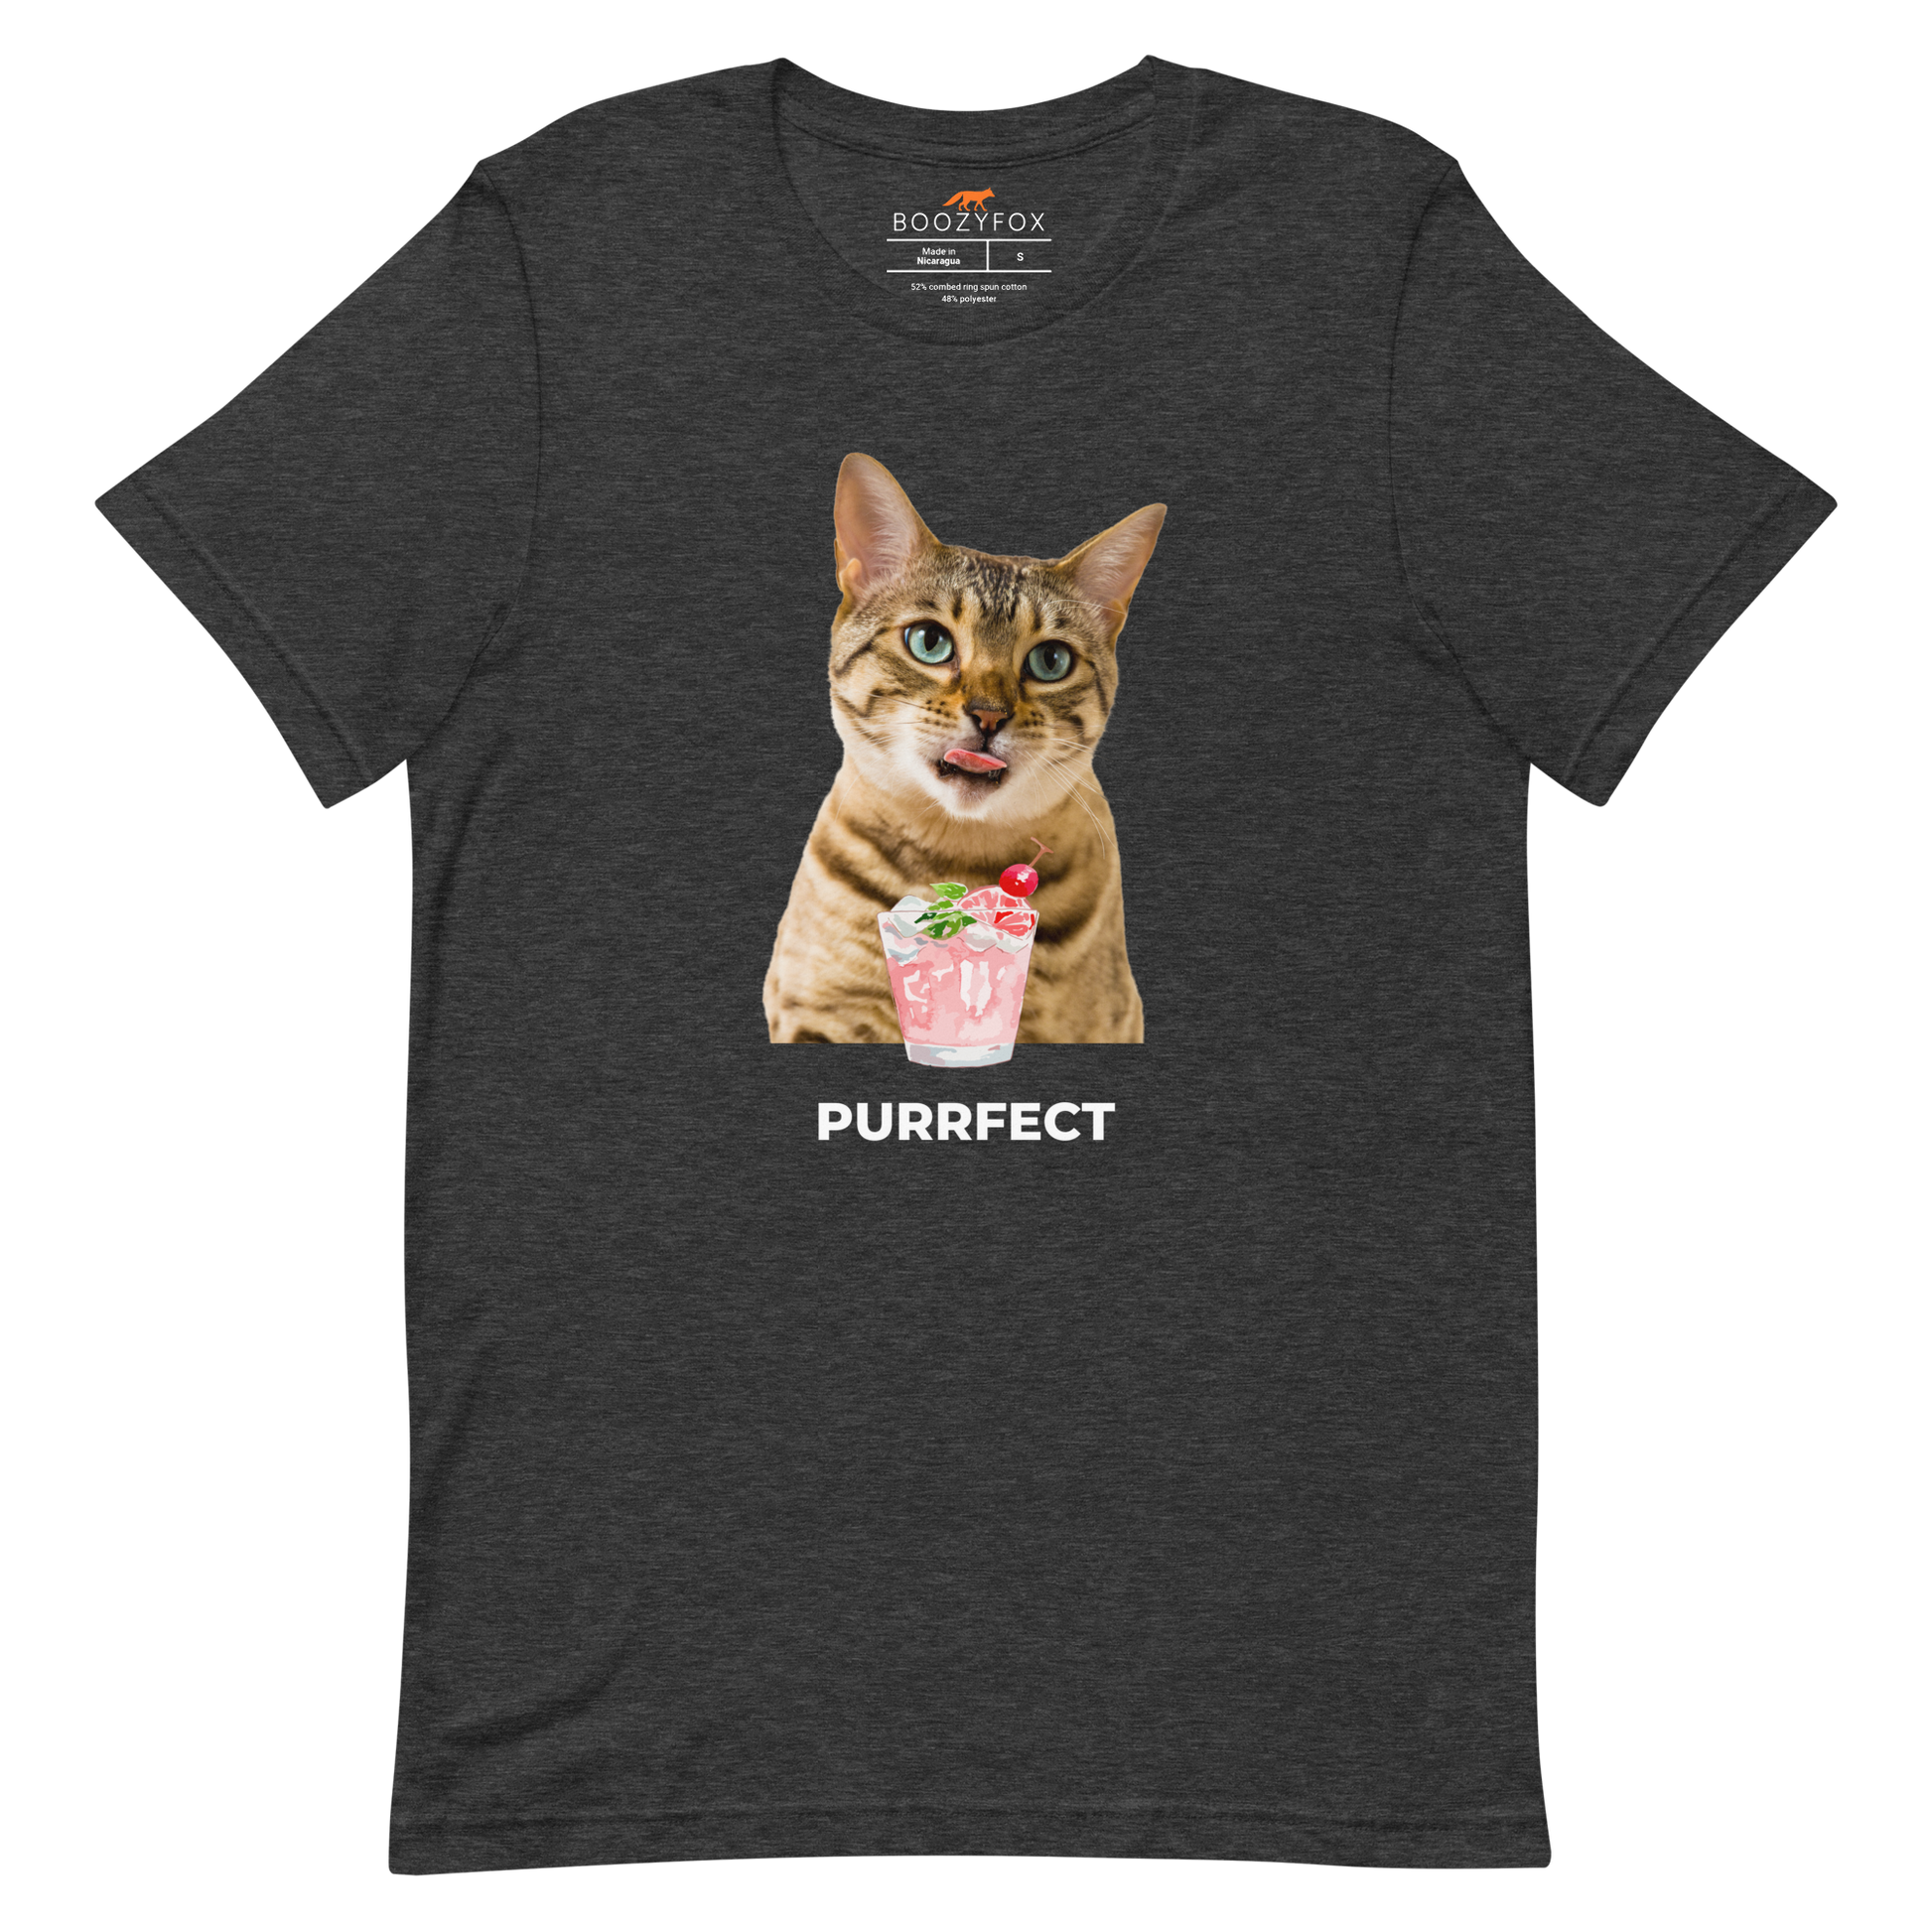 Dark Grey Heather Premium Cat T-Shirt featuring a Purrfect graphic on the chest - Funny Graphic Cat Tees - Boozy Fox